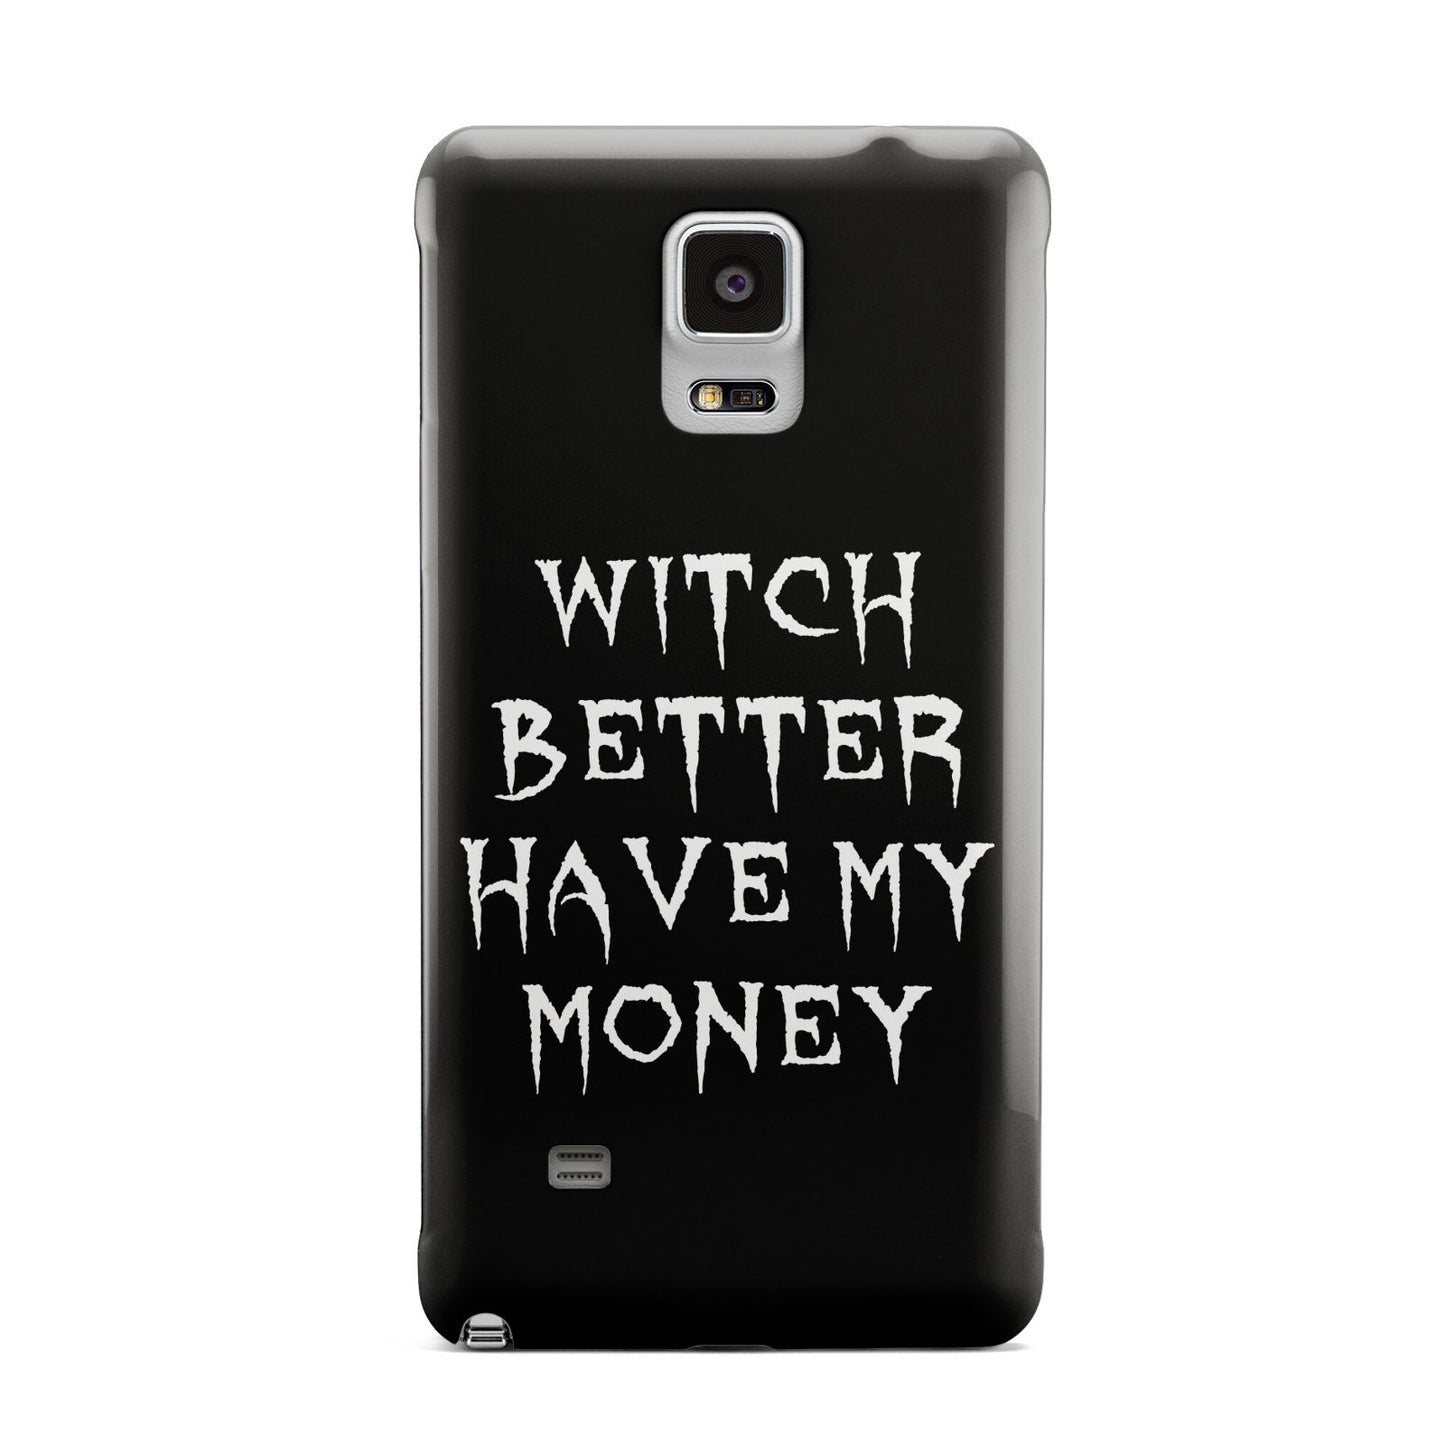 Witch Better Have My Money Samsung Galaxy Note 4 Case